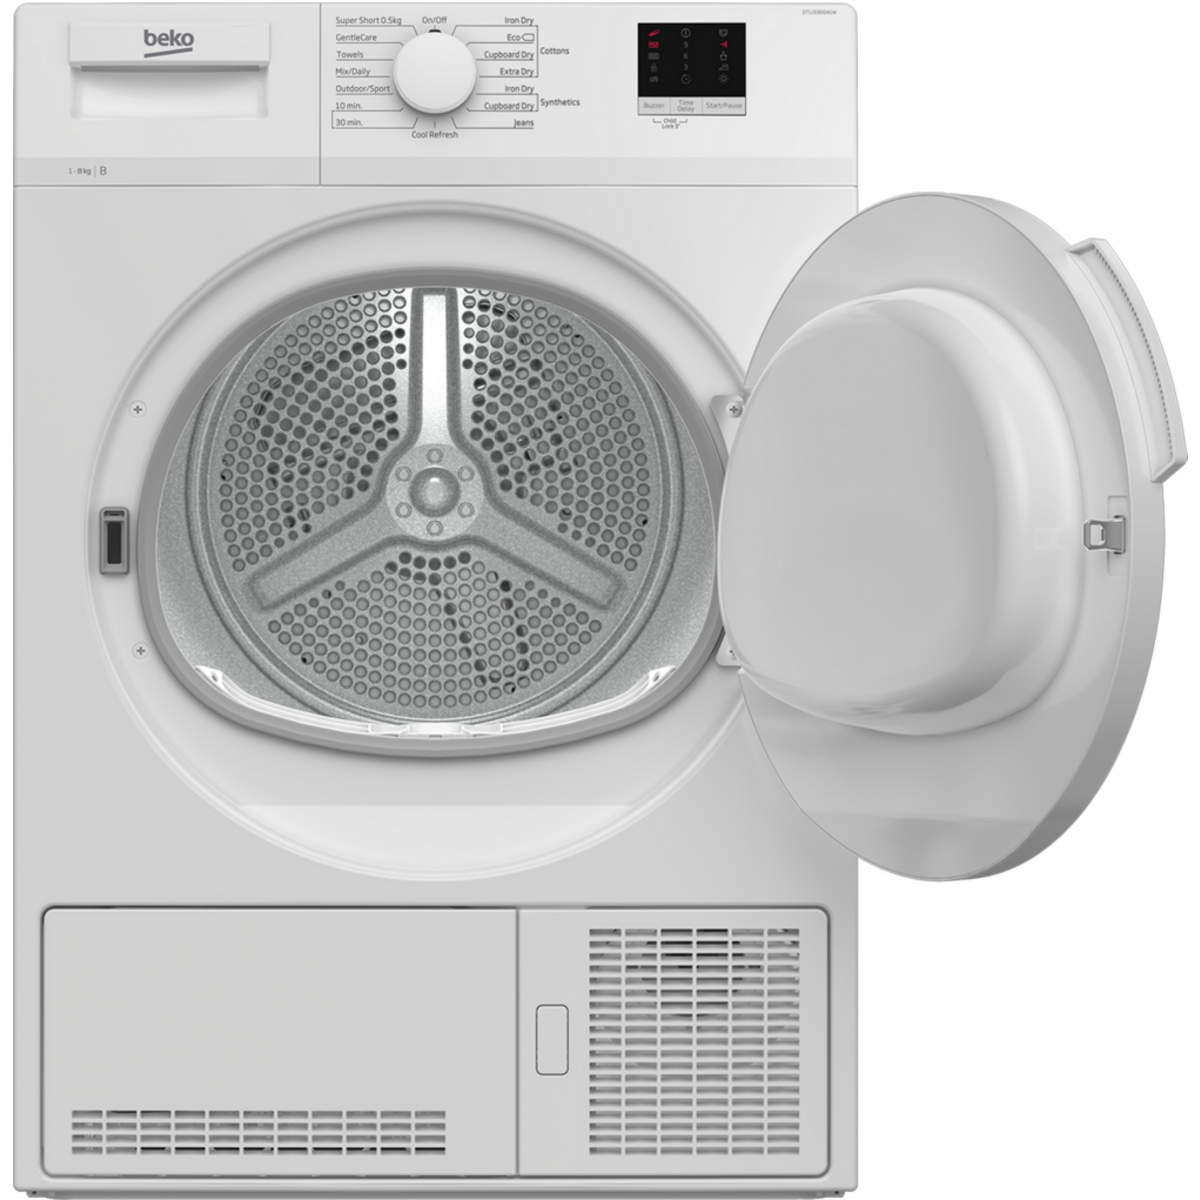 Beko DTLCE80041W B Rated 8kg Condenser Tumble Dryer White